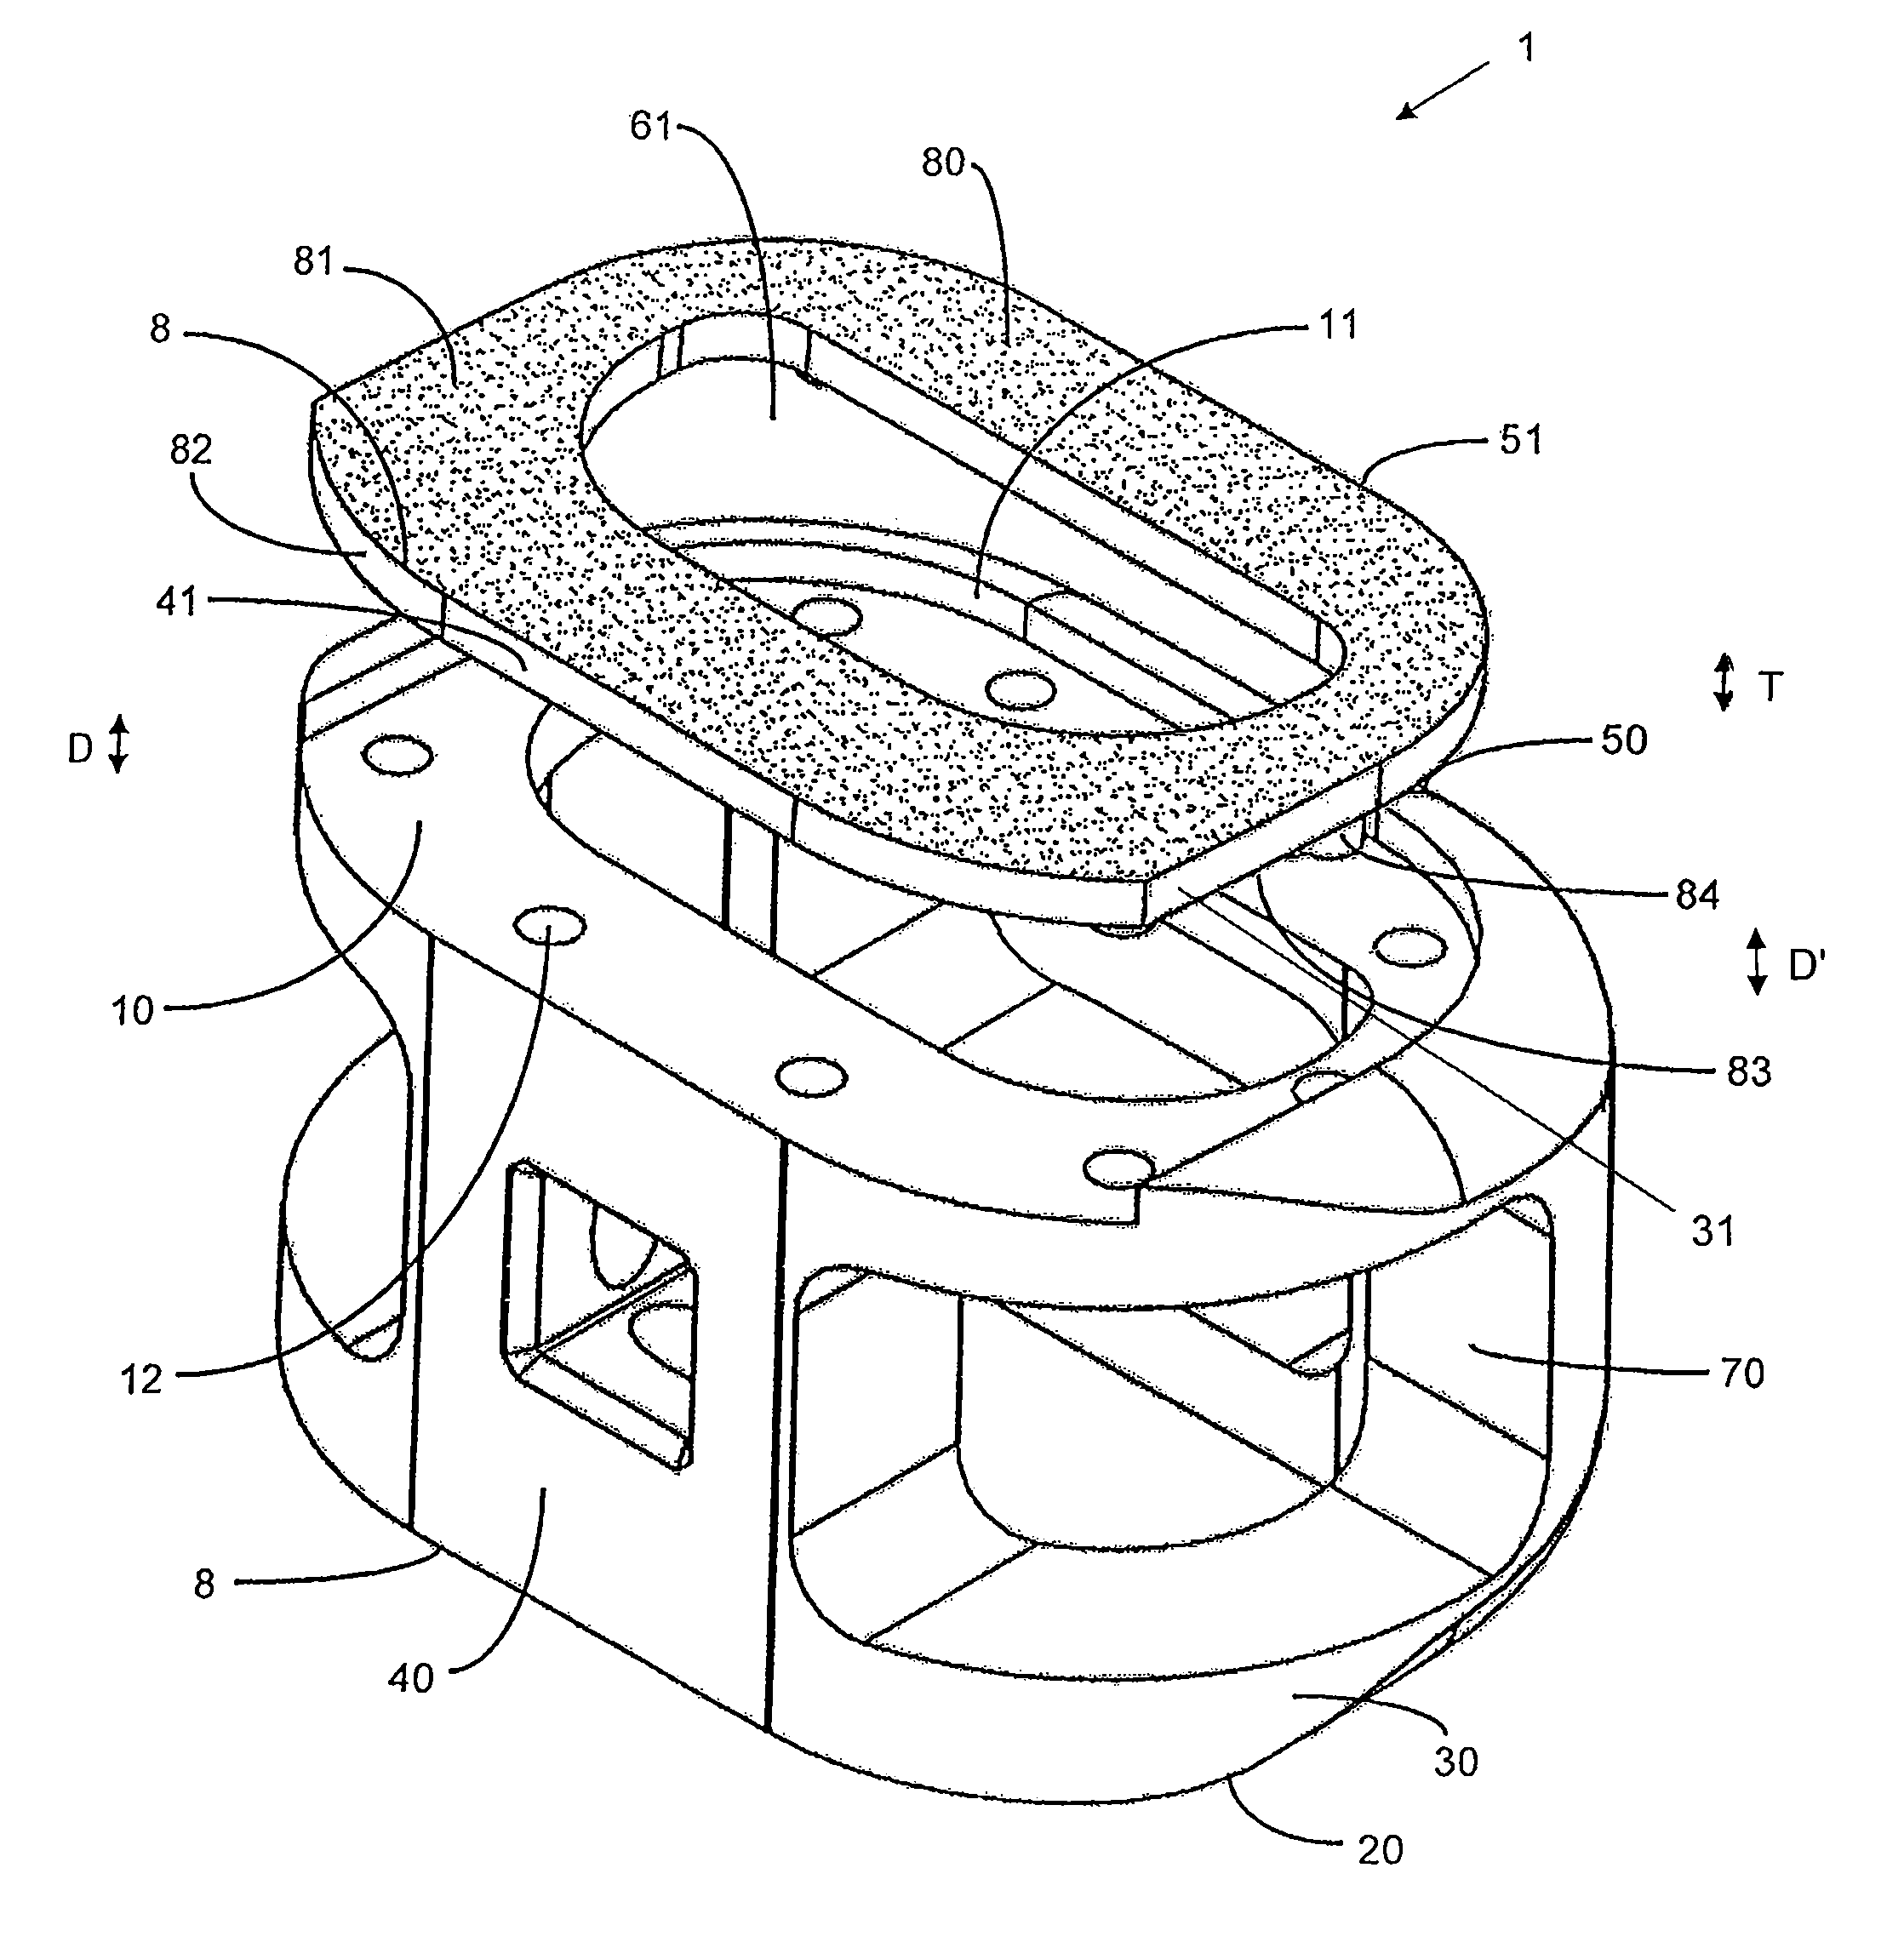 Spinal implant and integration plate for optimizing vertebral endplate contact load-bearing edges